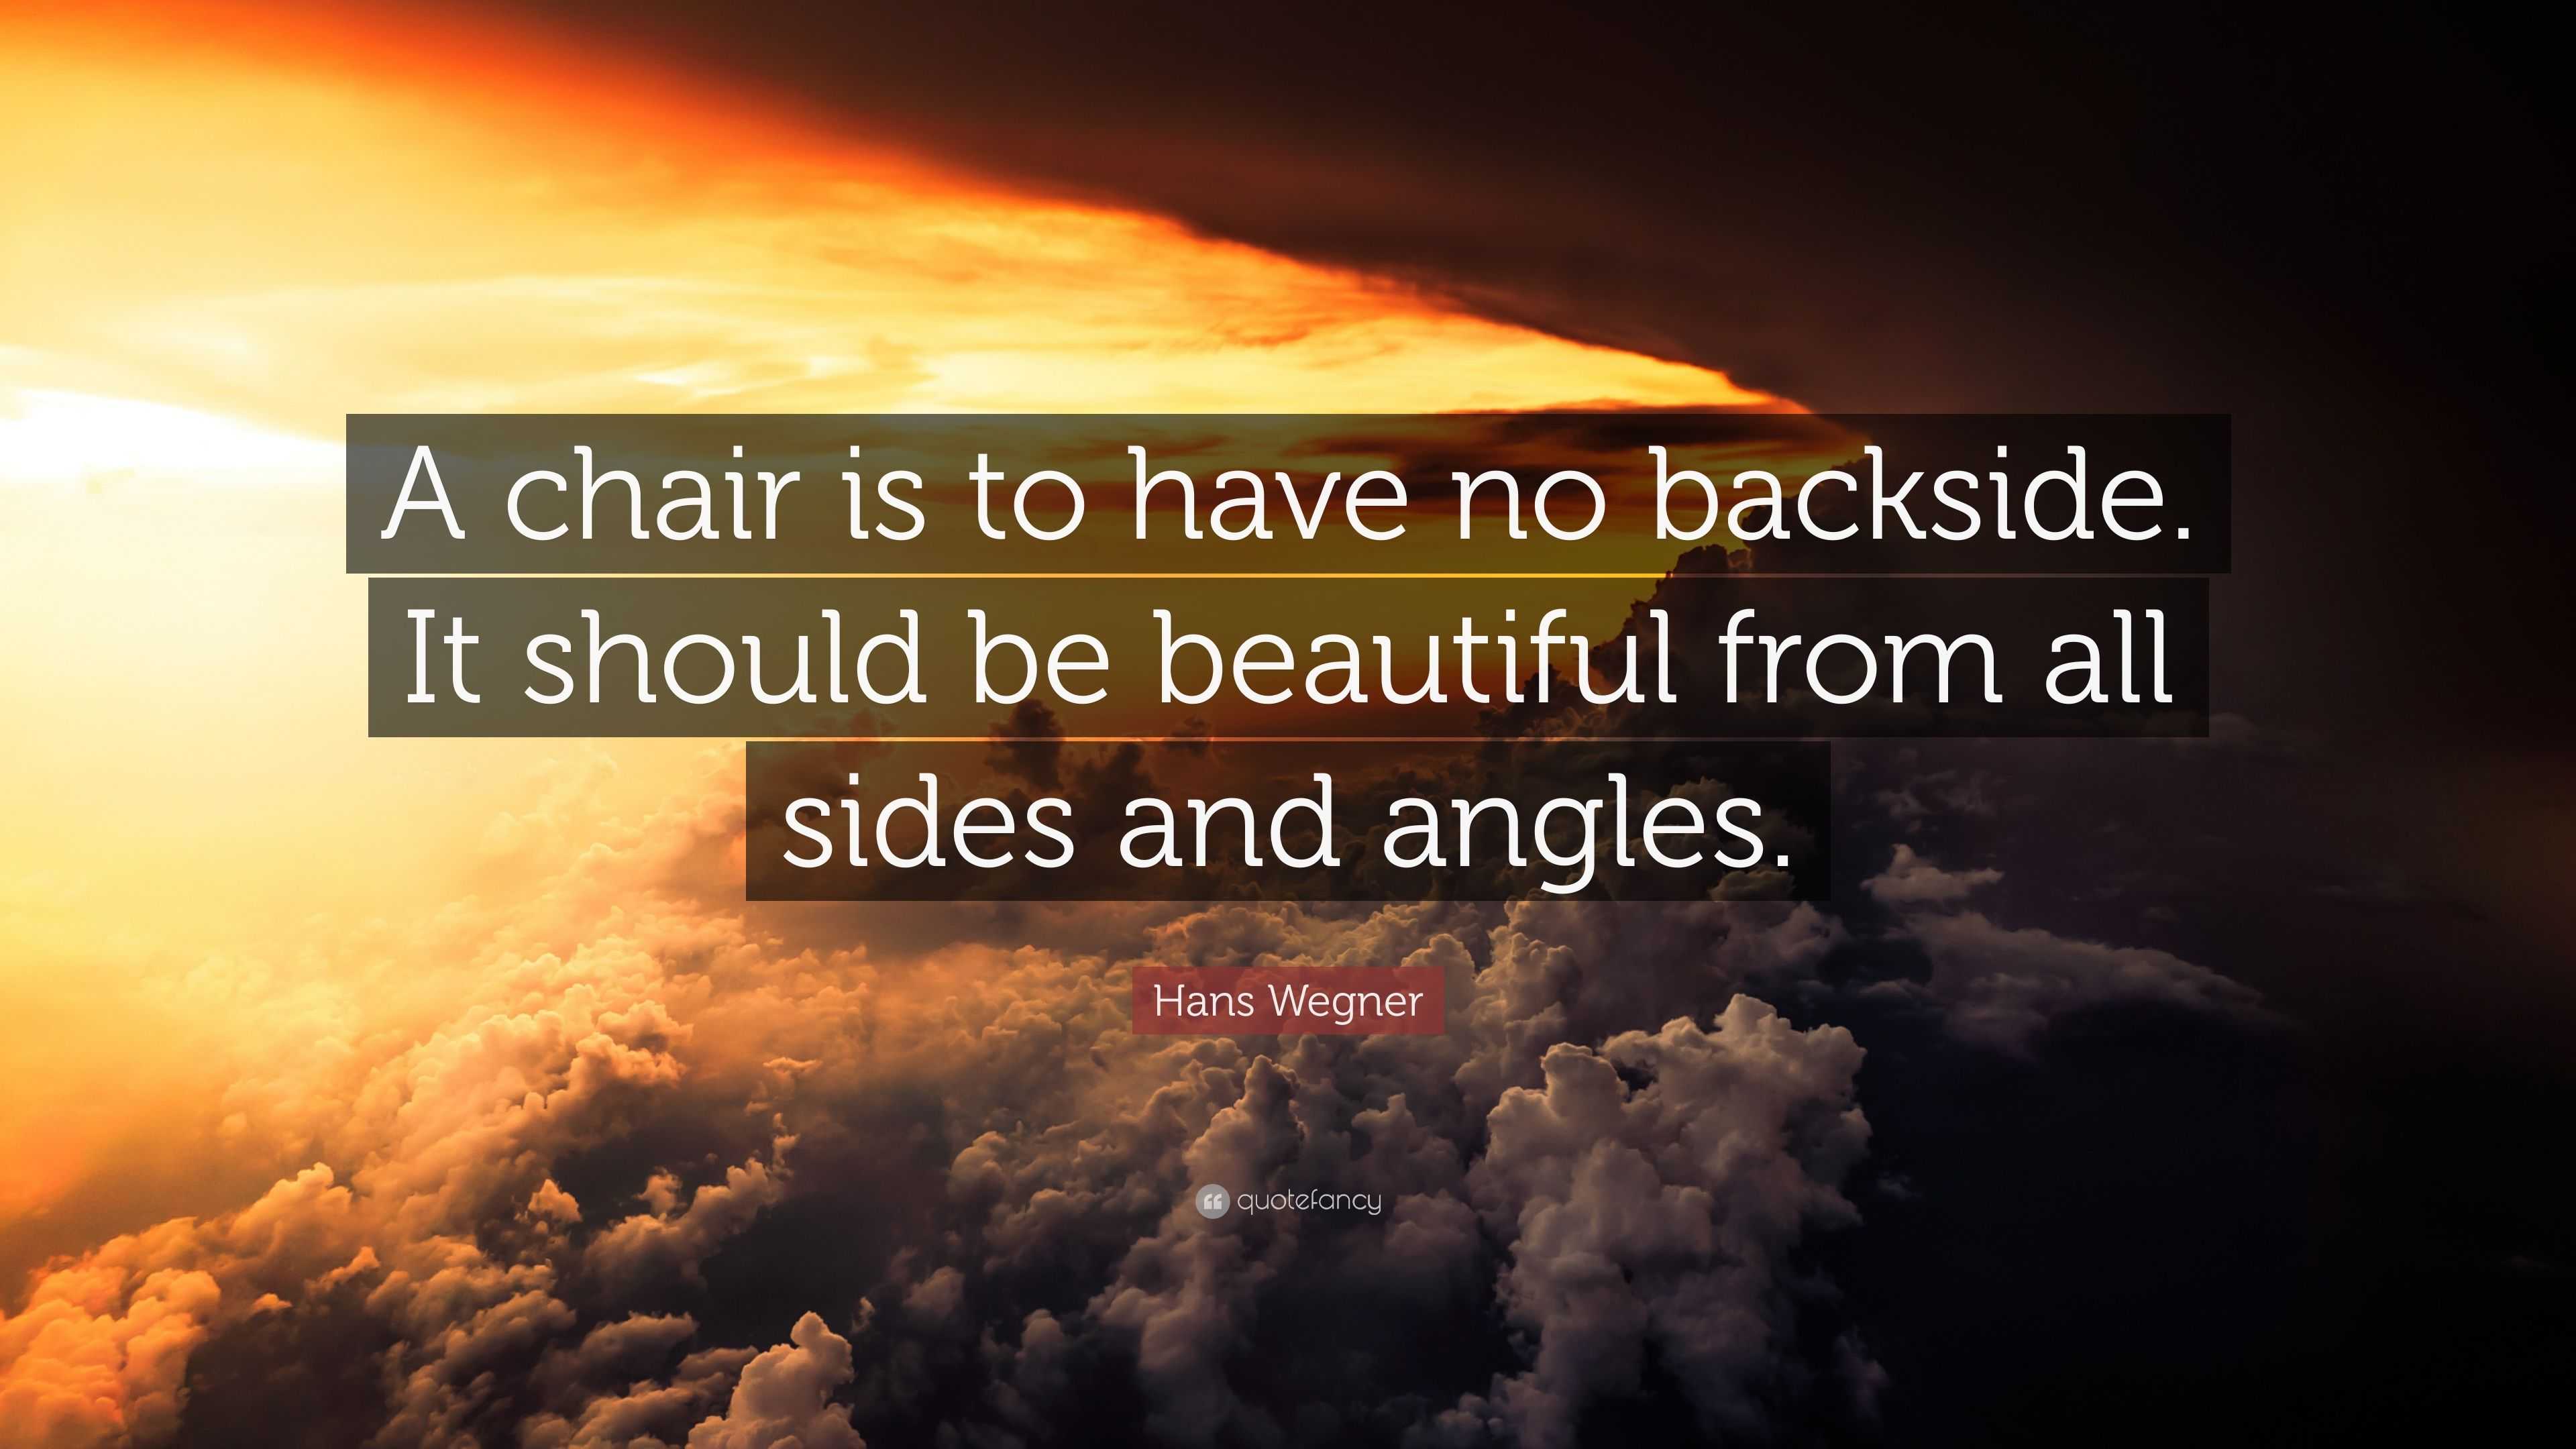 Hans Wegner Quote: “A chair is to have no backside. It should be